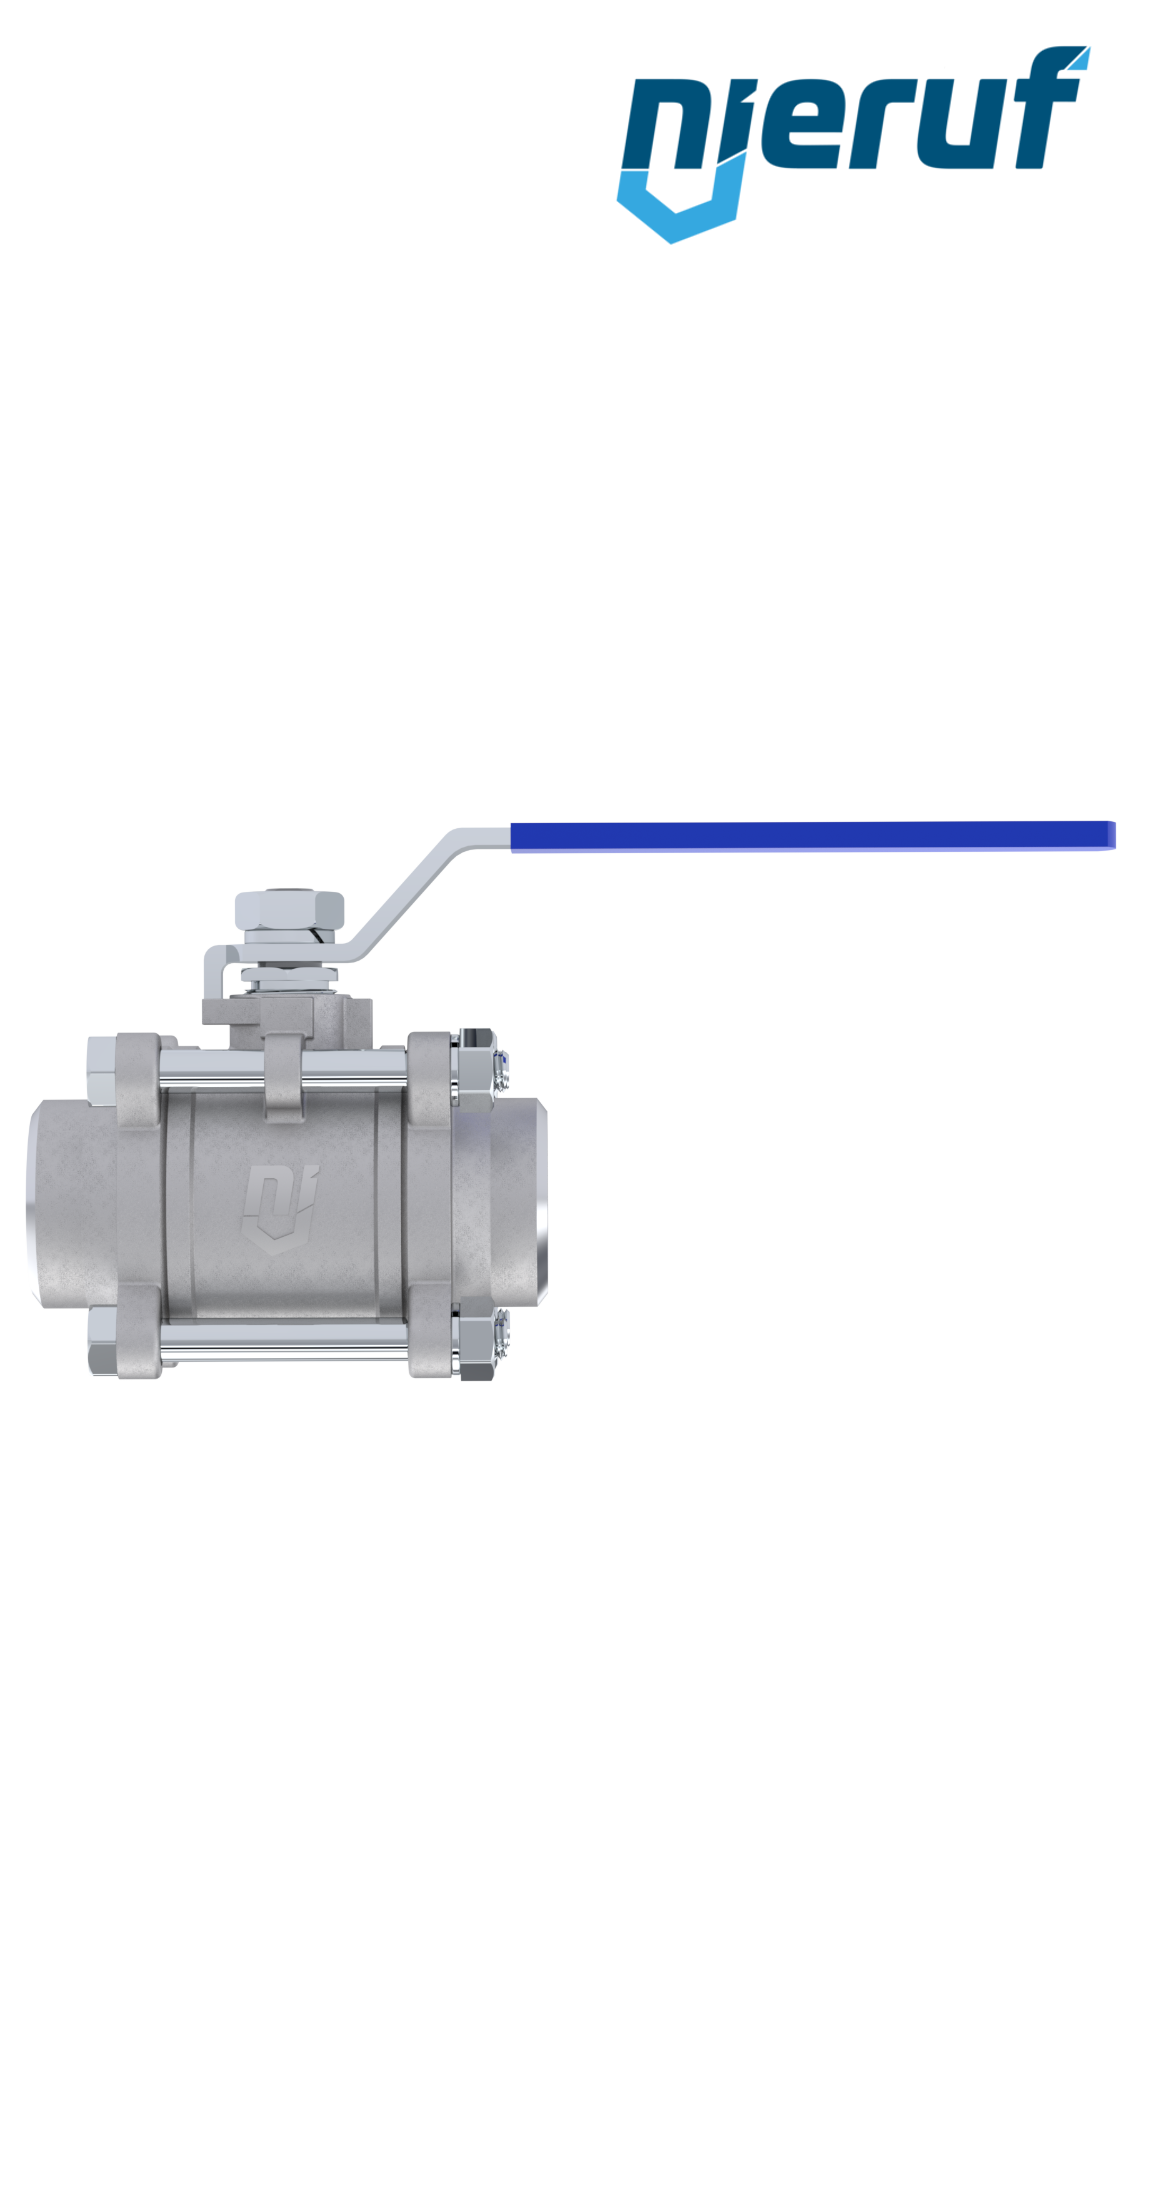 ball valve made of stainless steel DN65 - 2 1/2" inch GK04 with butt weld